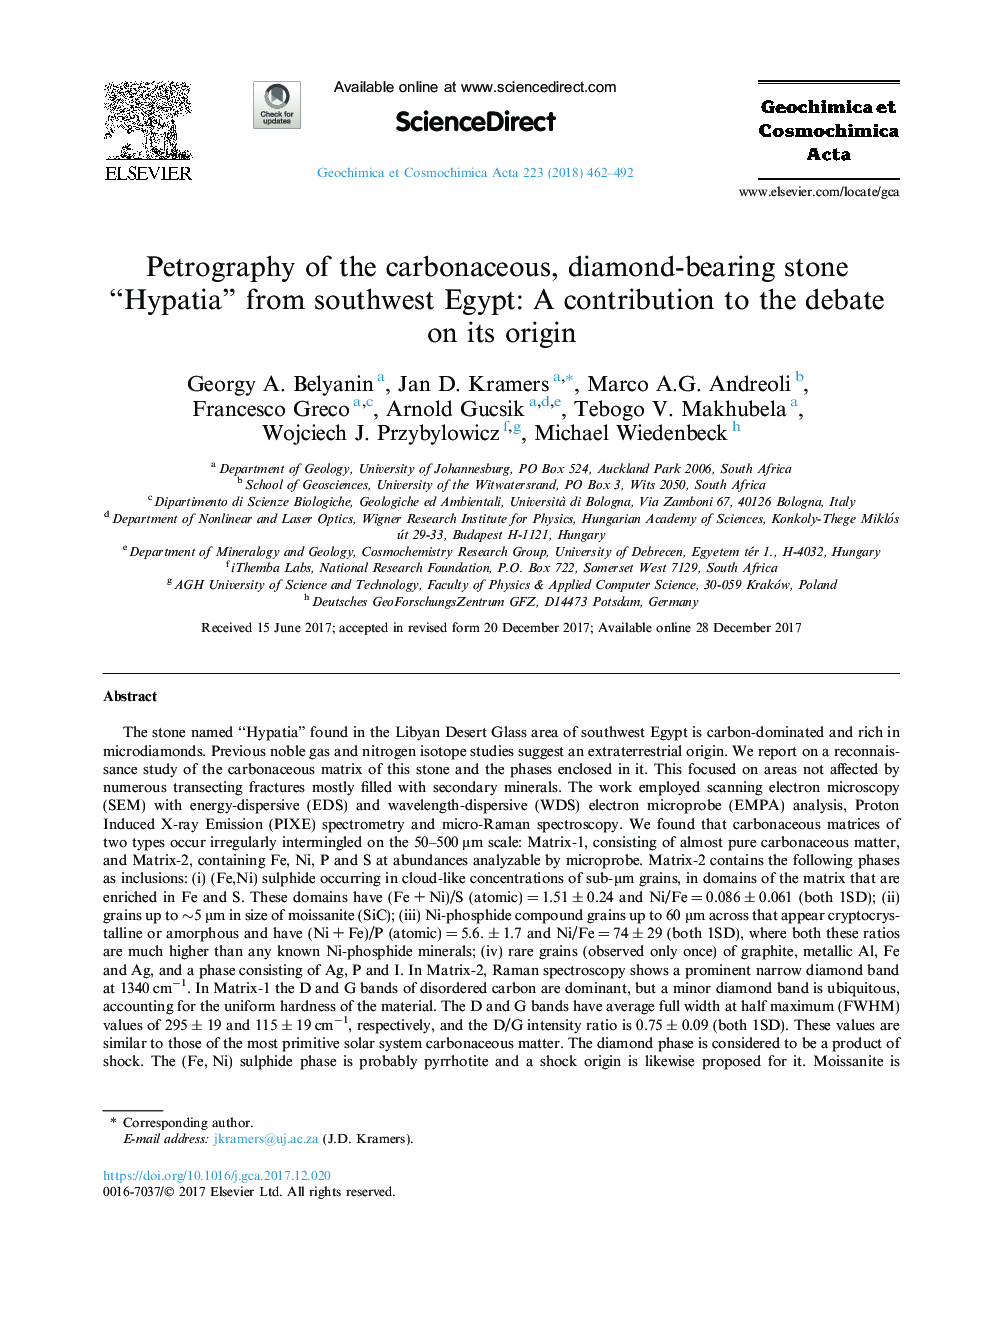 Petrography of the carbonaceous, diamond-bearing stone “Hypatia” from southwest Egypt: A contribution to the debate on its origin